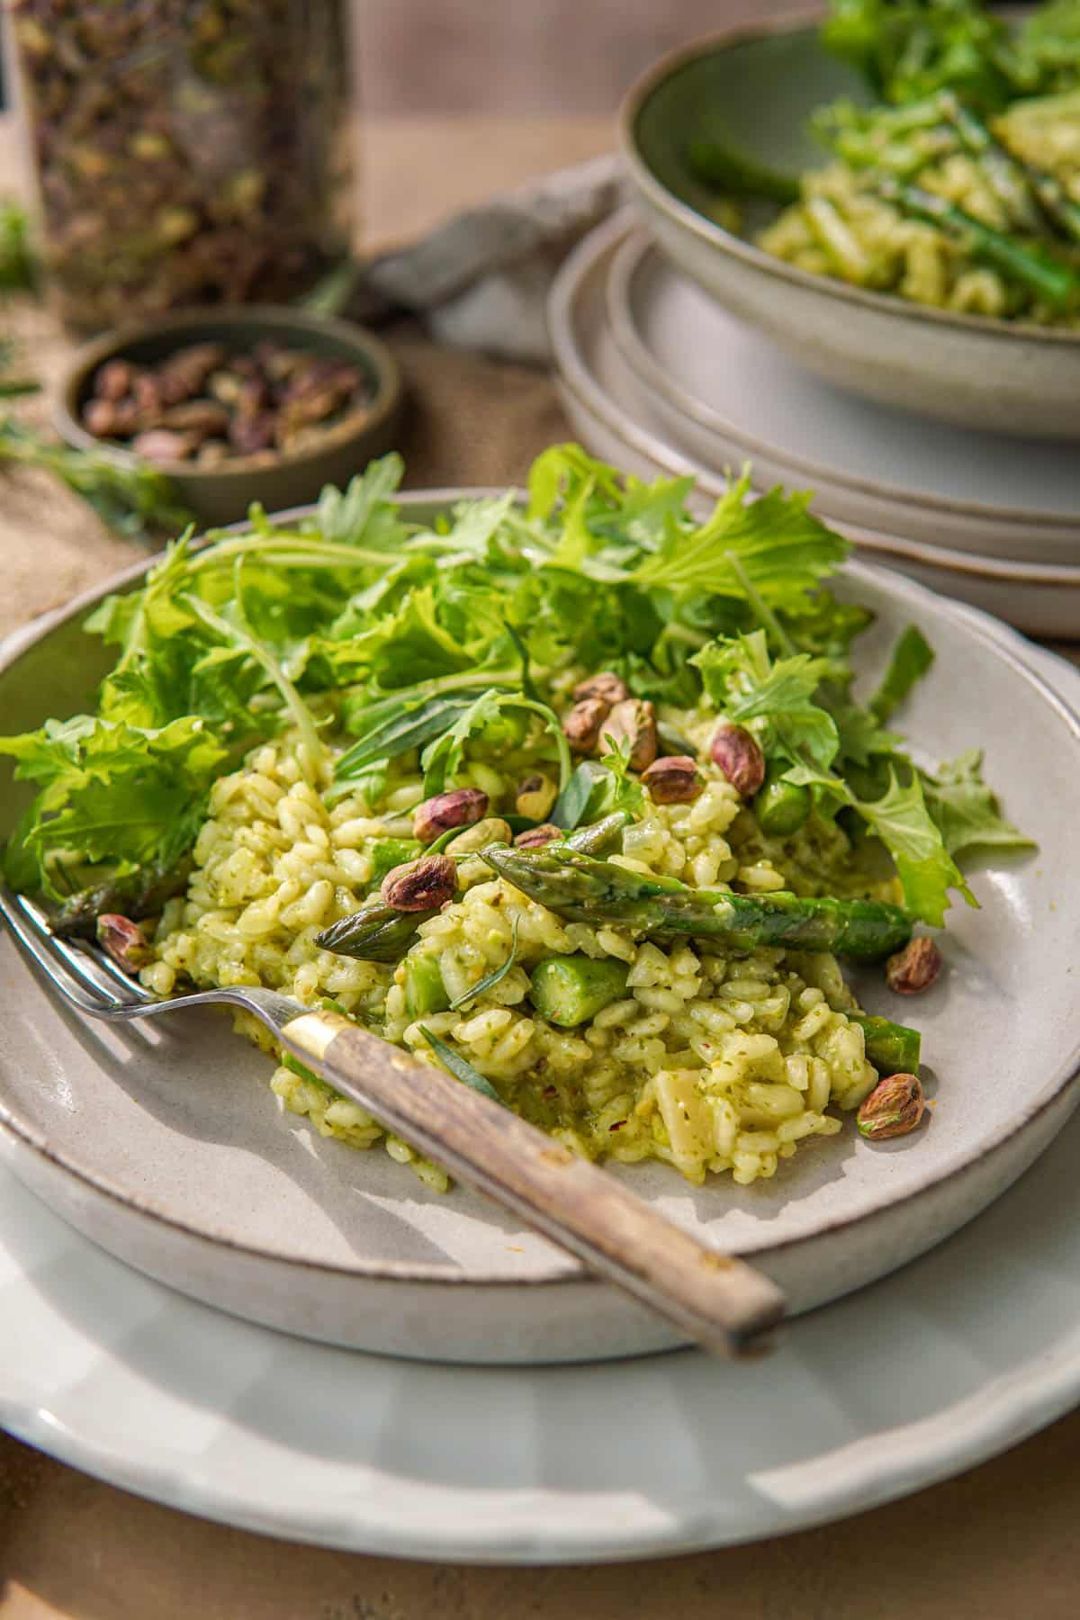 Risotto with green asparagus and pesto of turnip greens